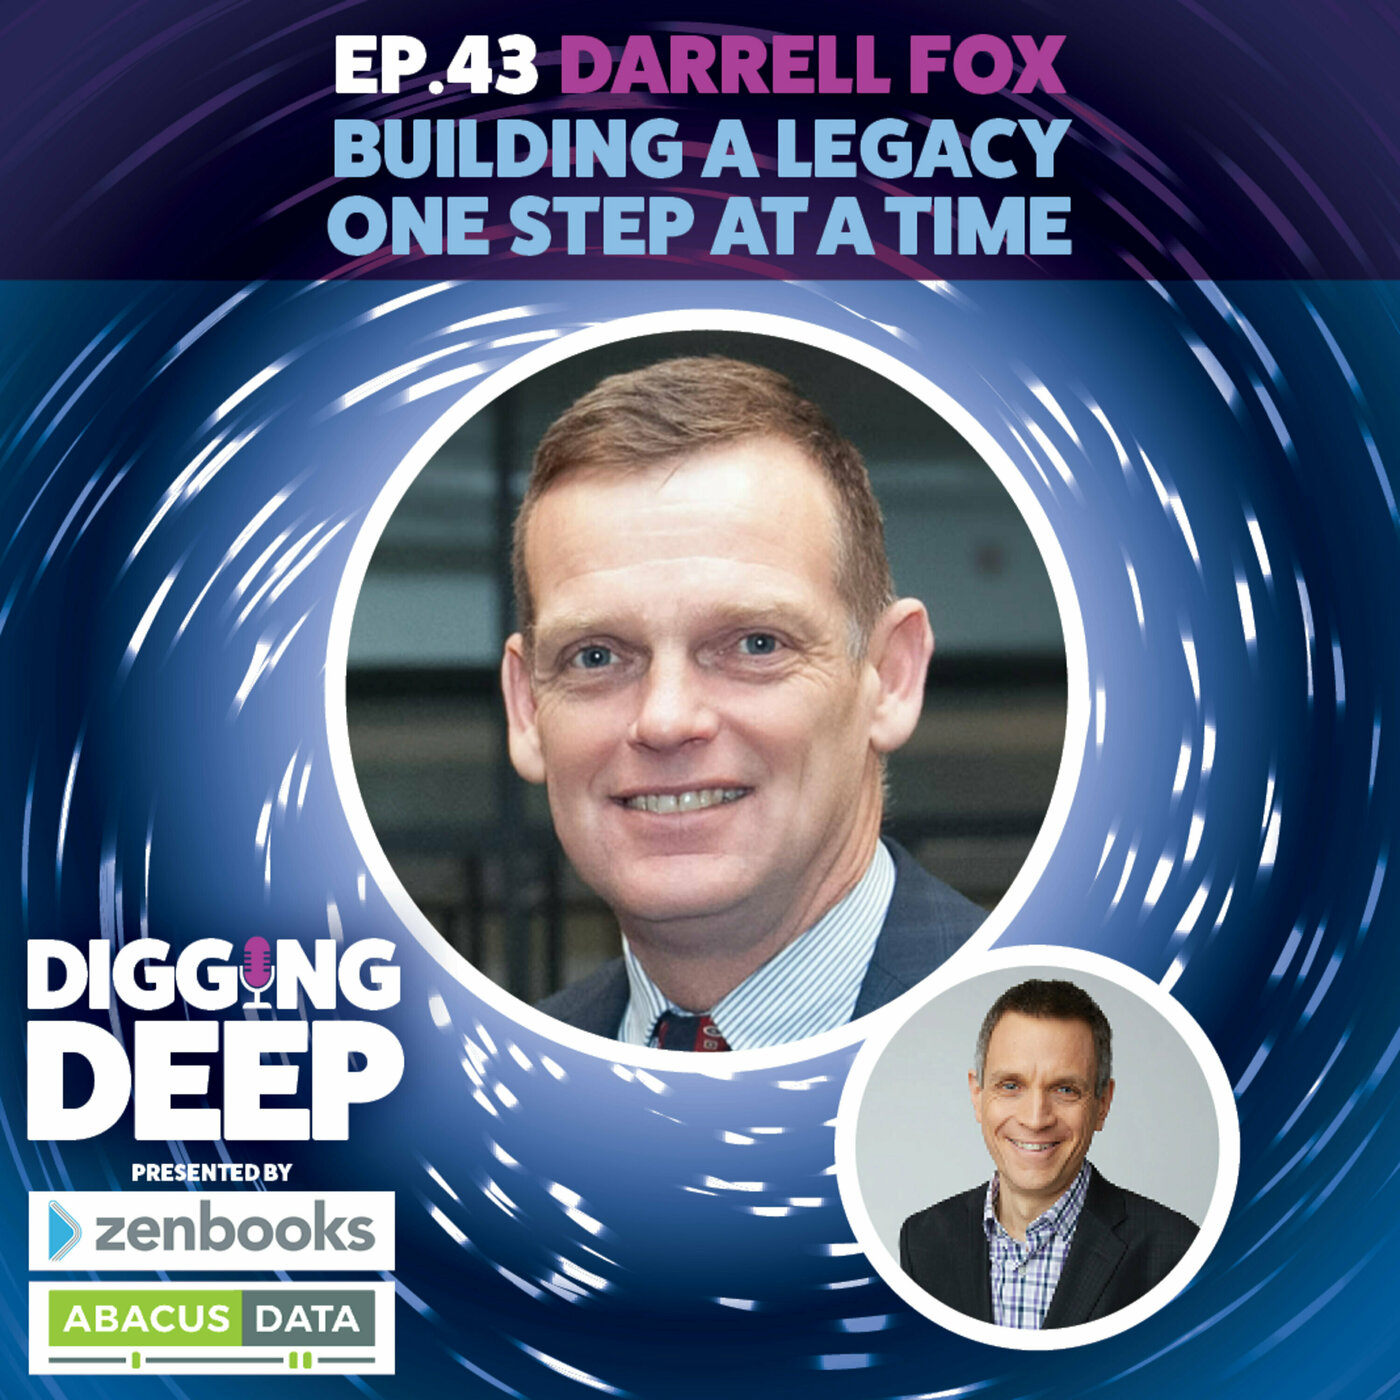 Darrell Fox: Building a Legacy One Step at a Time